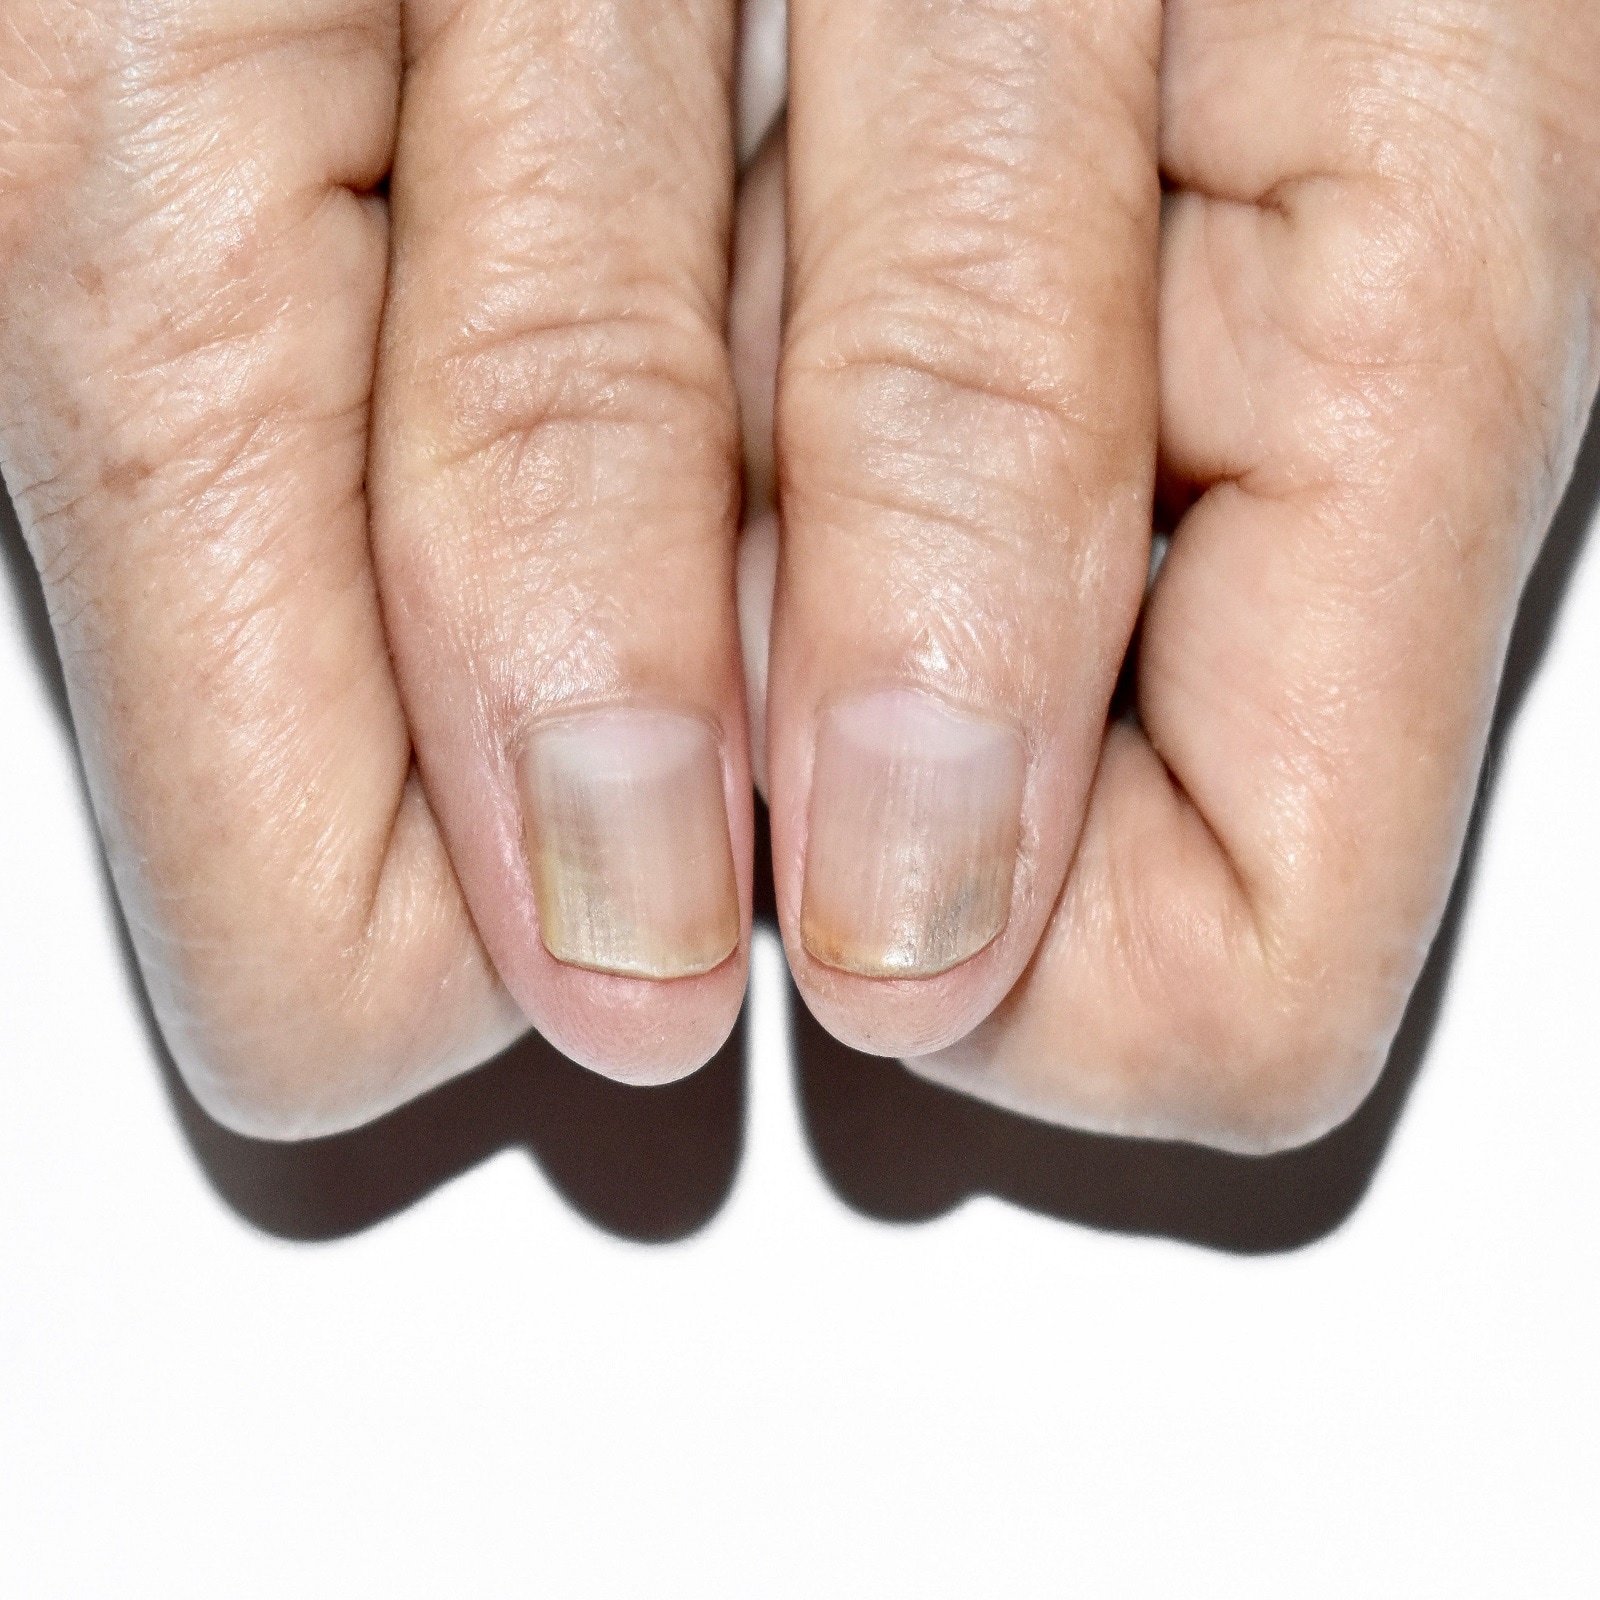 10 High Cholesterol Warning Symptoms in Fingers and Toes